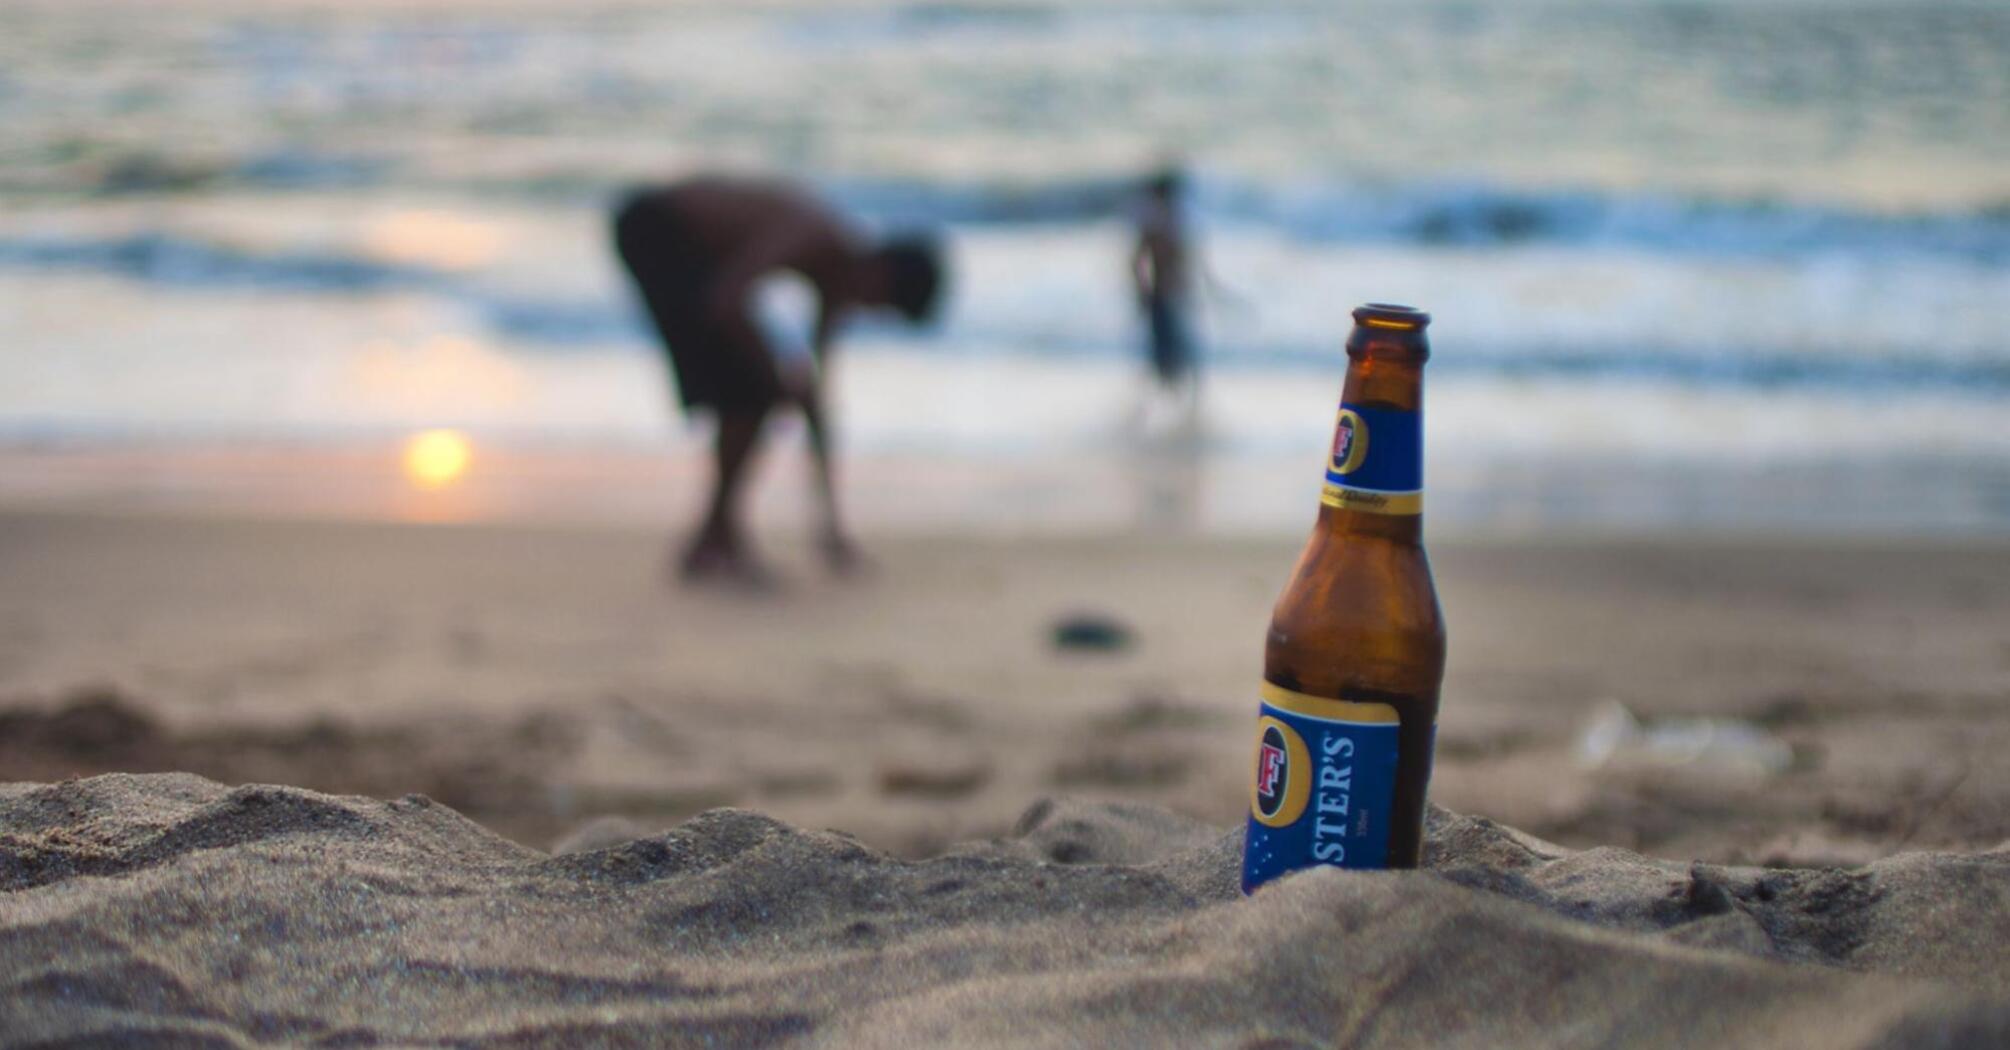 Bottle of the beer on the beach